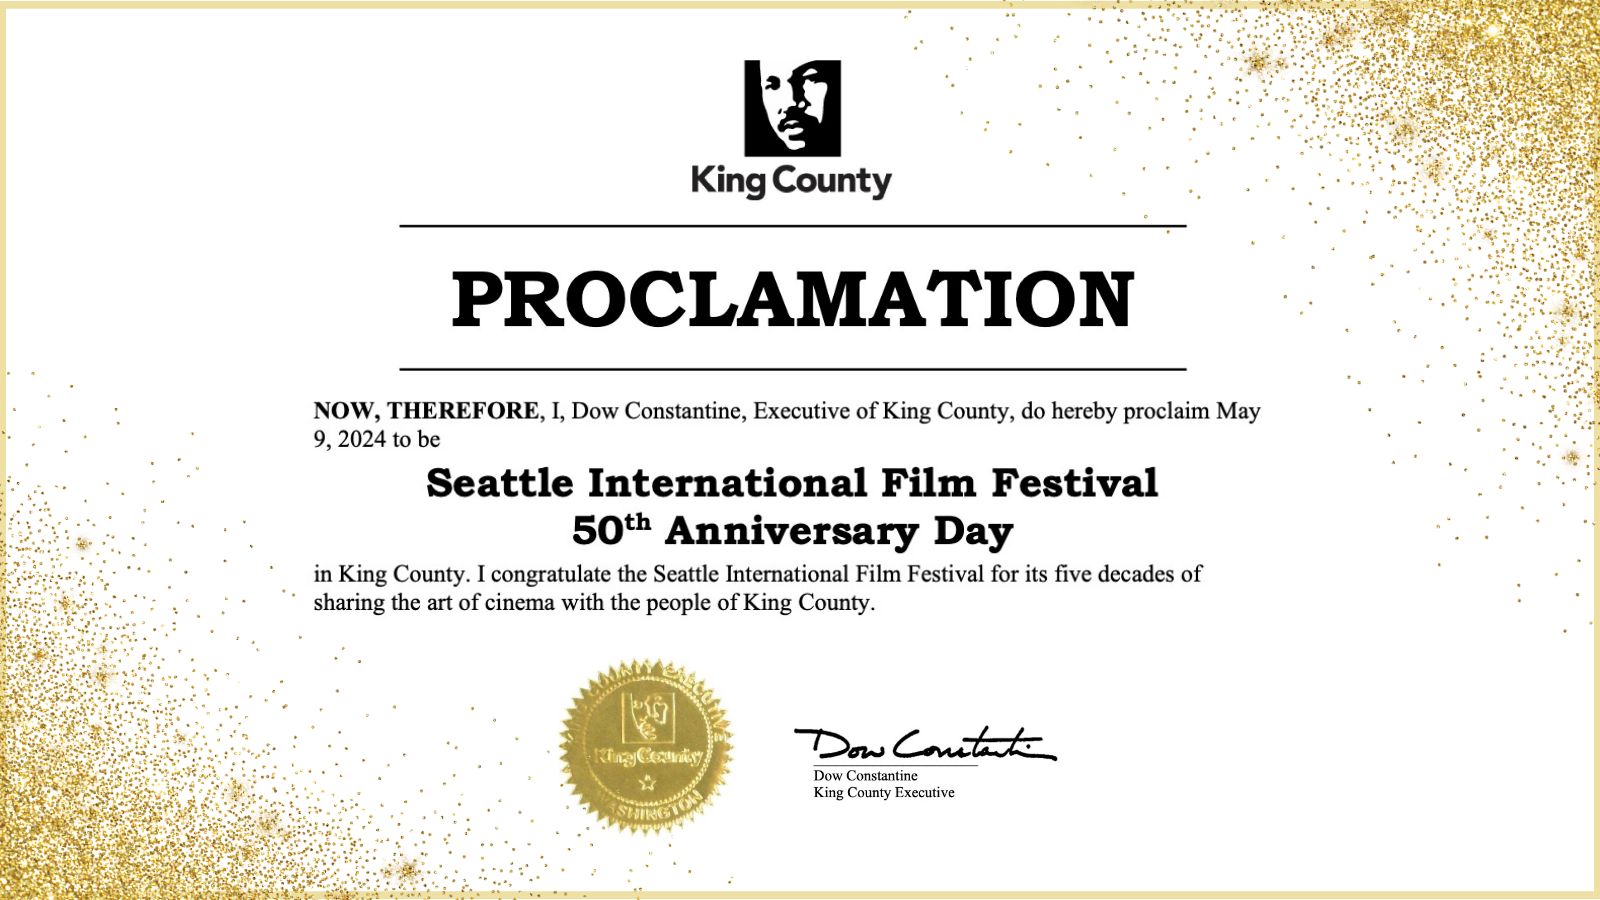 King County Proclamation